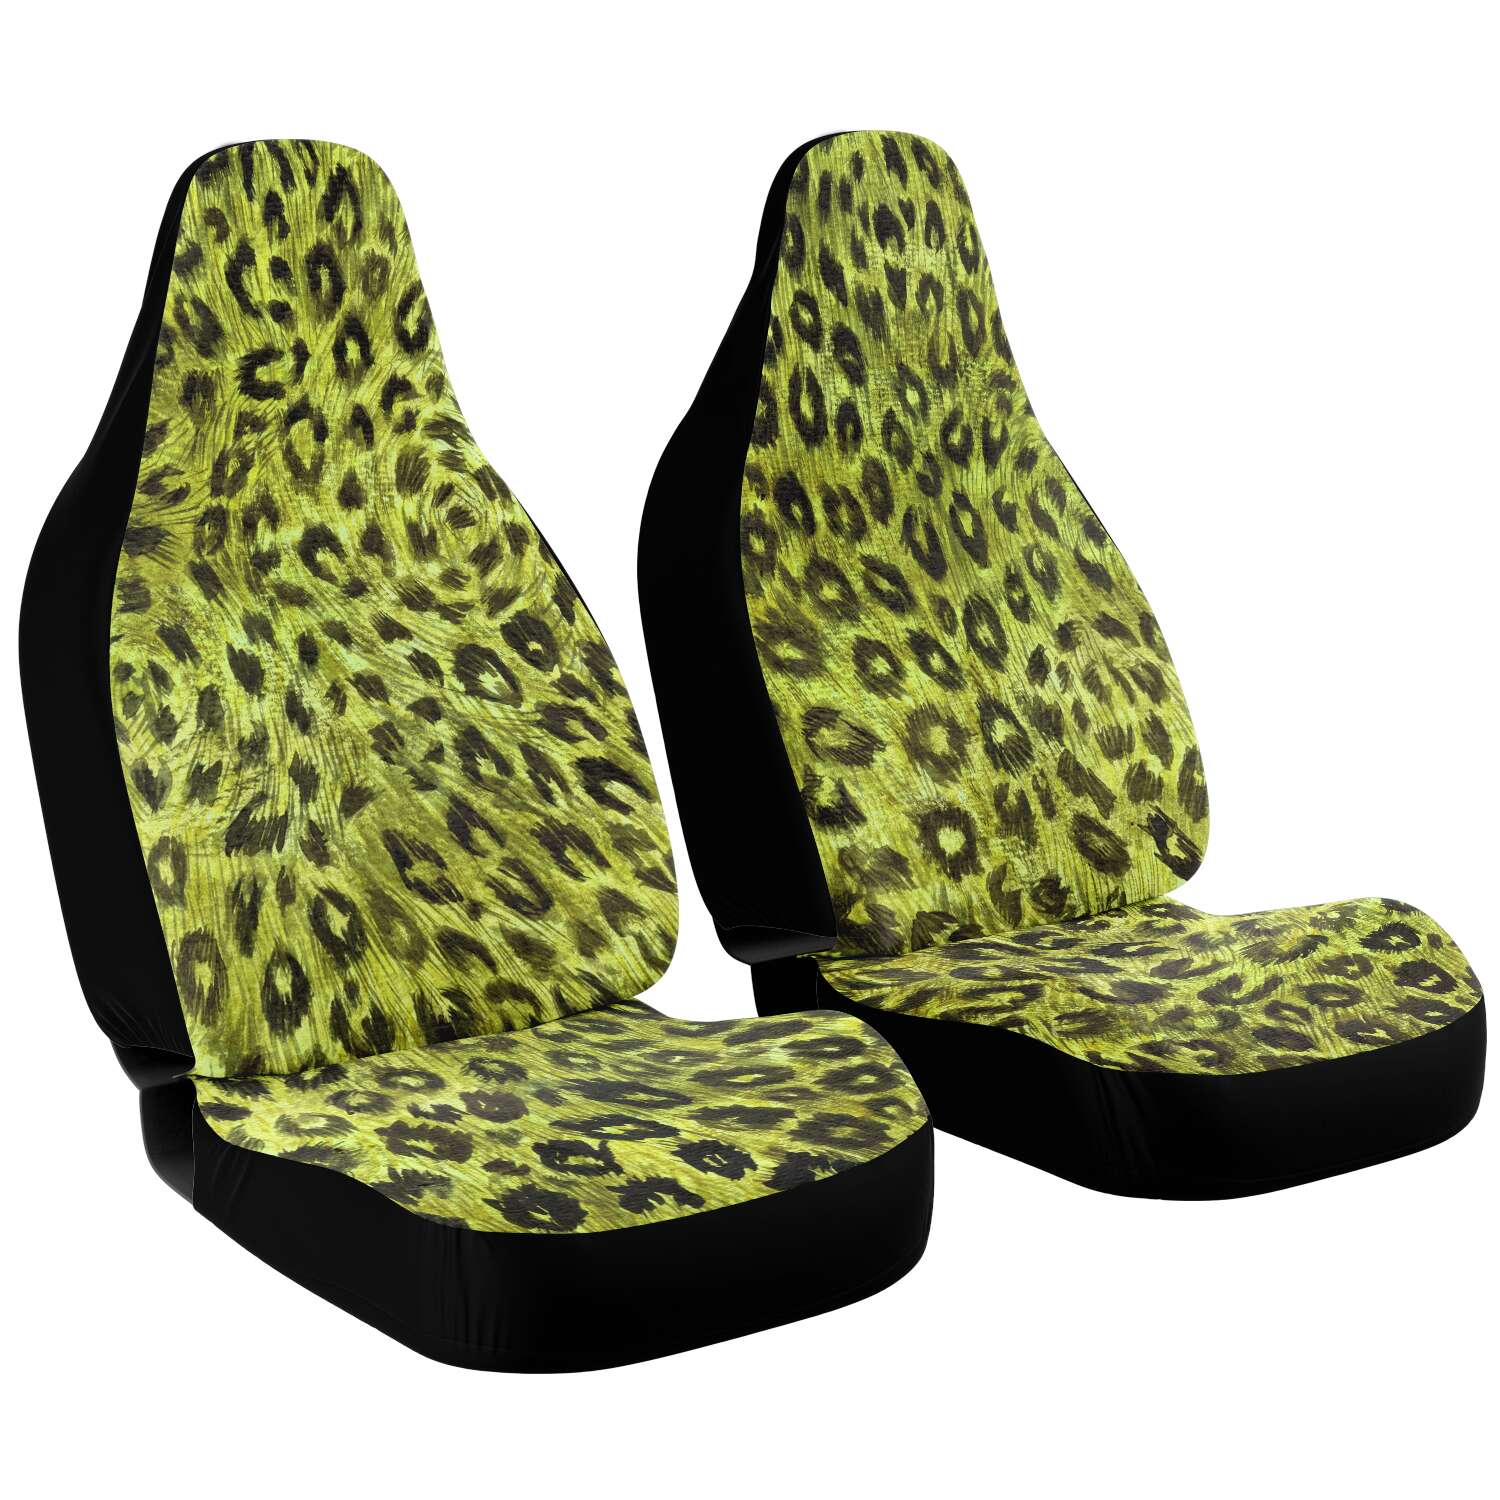 Leopard Car Seat Cover, Yellow Leopard Animal Print Designer Essential Premium Quality Best Machine Washable Microfiber Luxury Car Seat Cover - 2 Pack For Your Car Seat Protection, Cart Seat Protectors, Car Seat Accessories, Pair of 2 Front Seat Covers, Custom Seat Covers